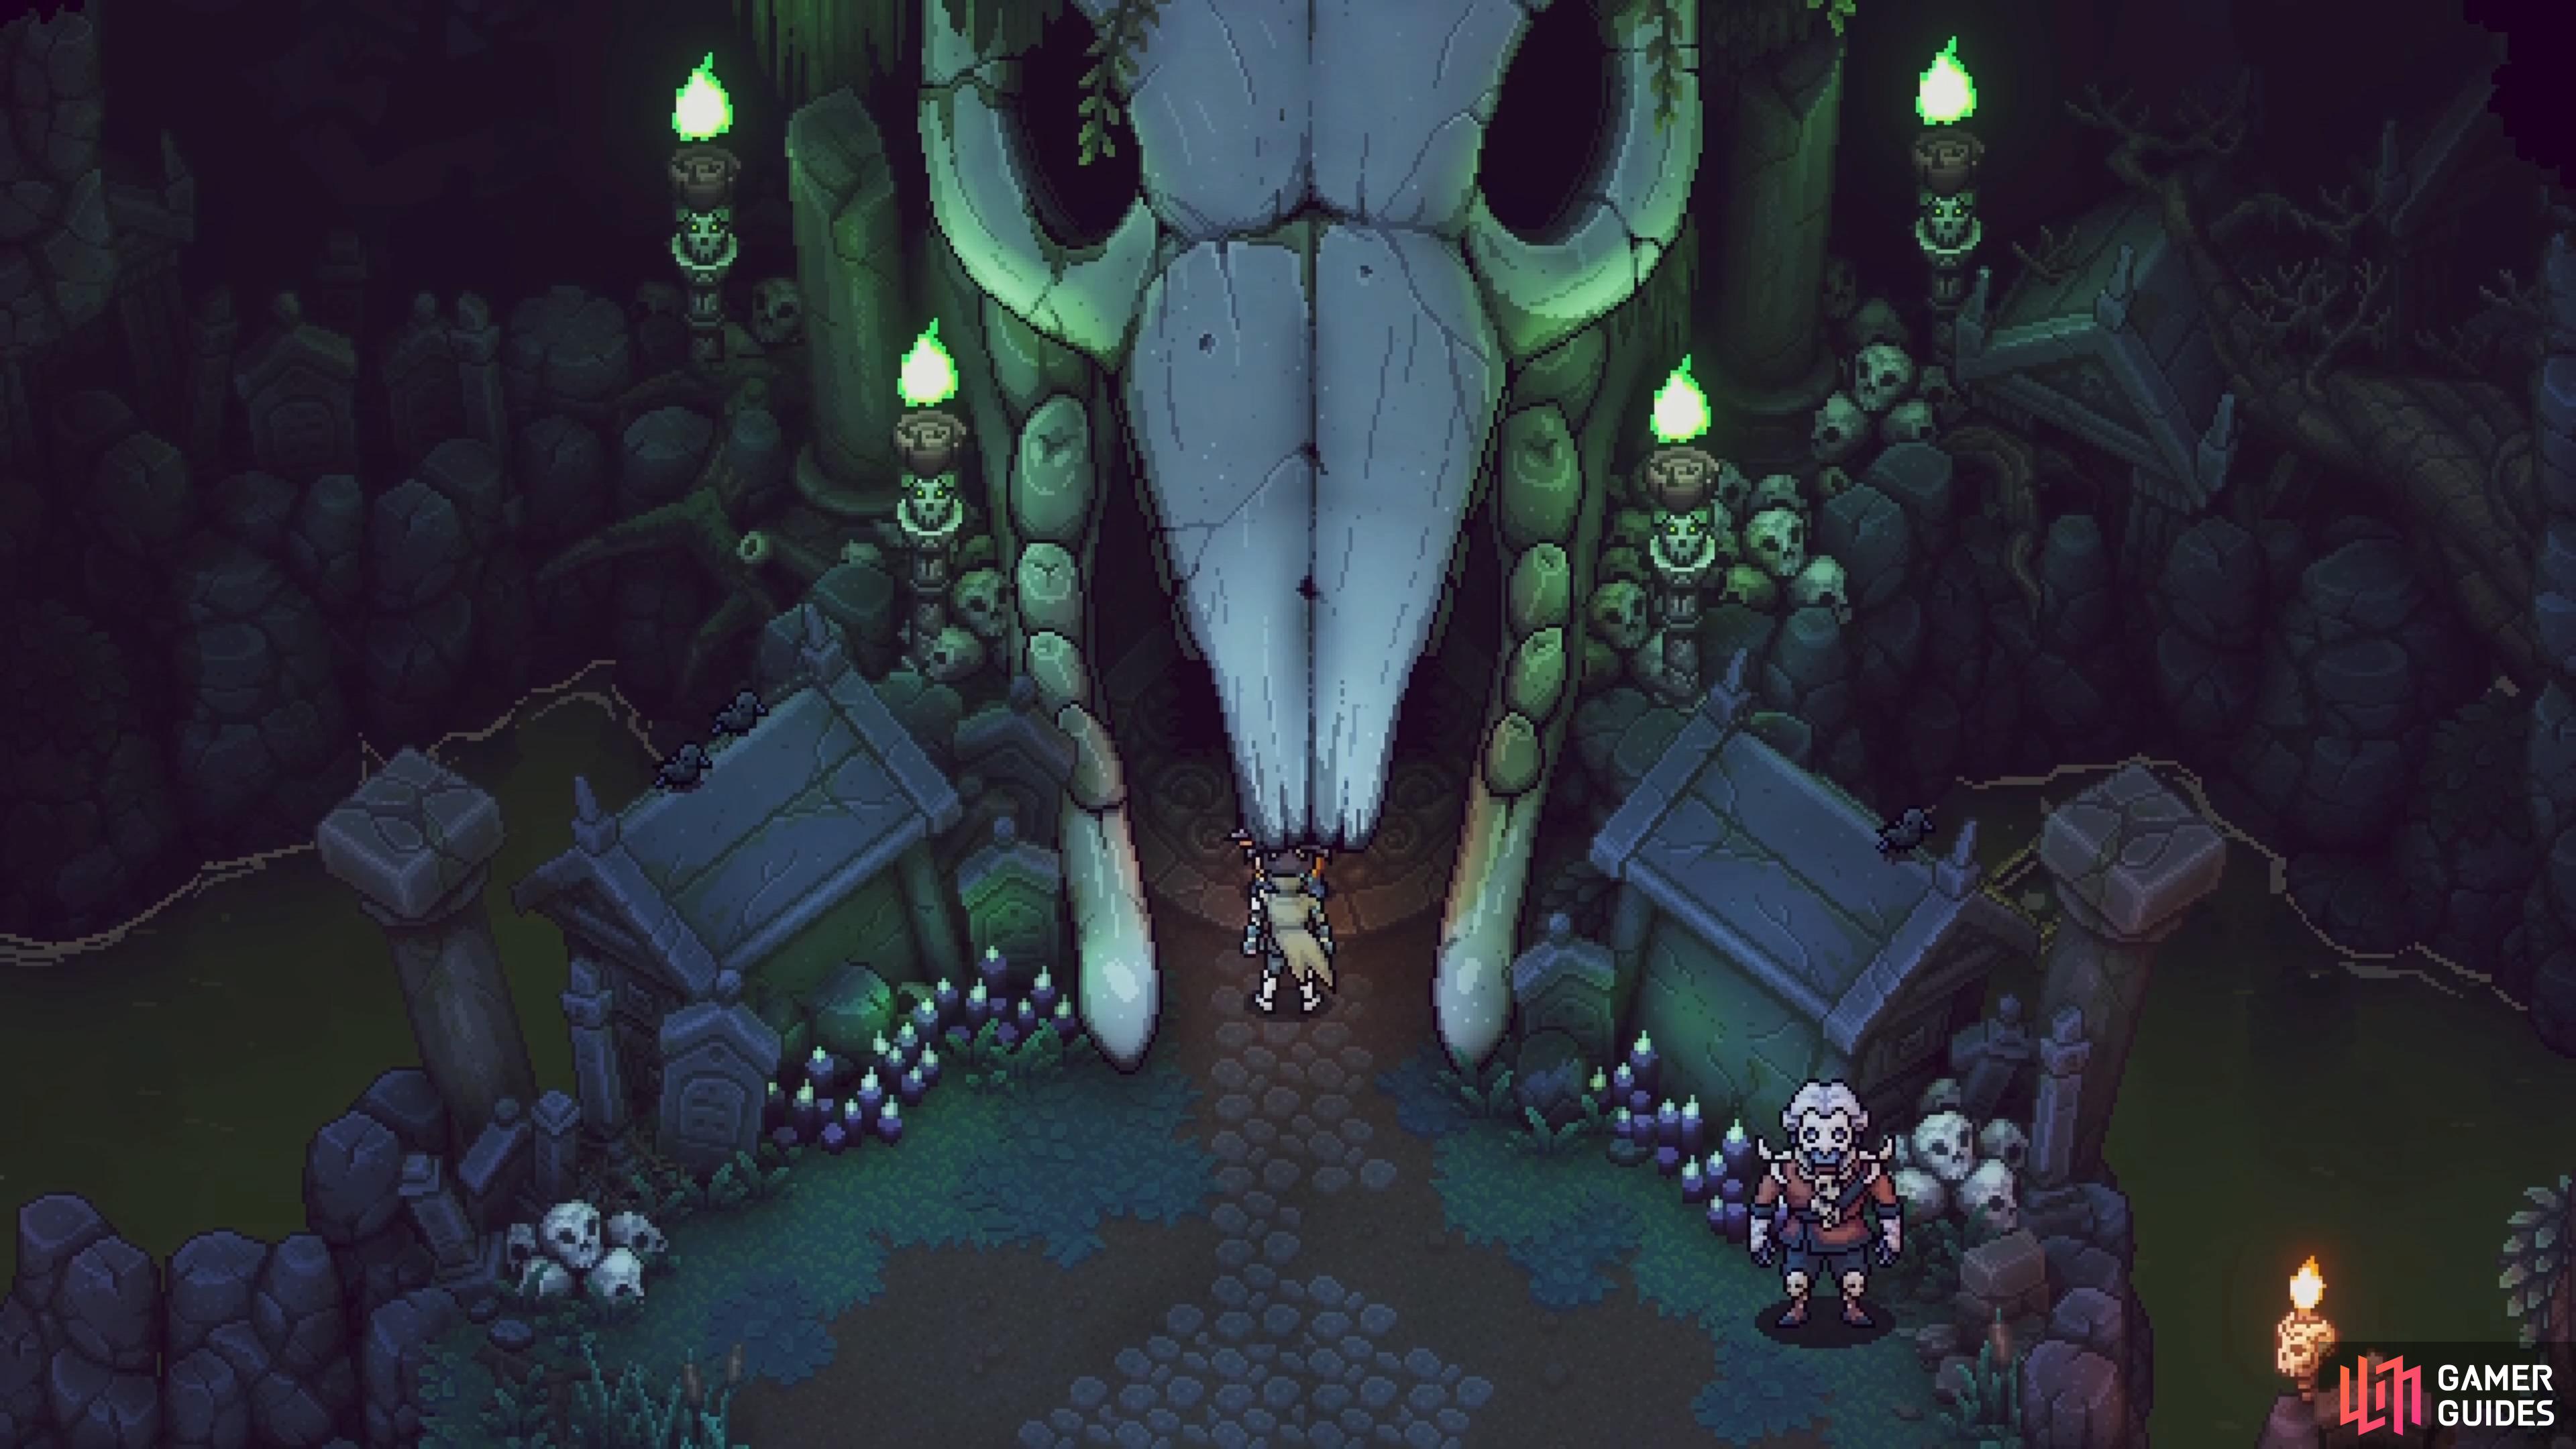 The entrance to the Necromancer’s Lair certainly feels intimidating.